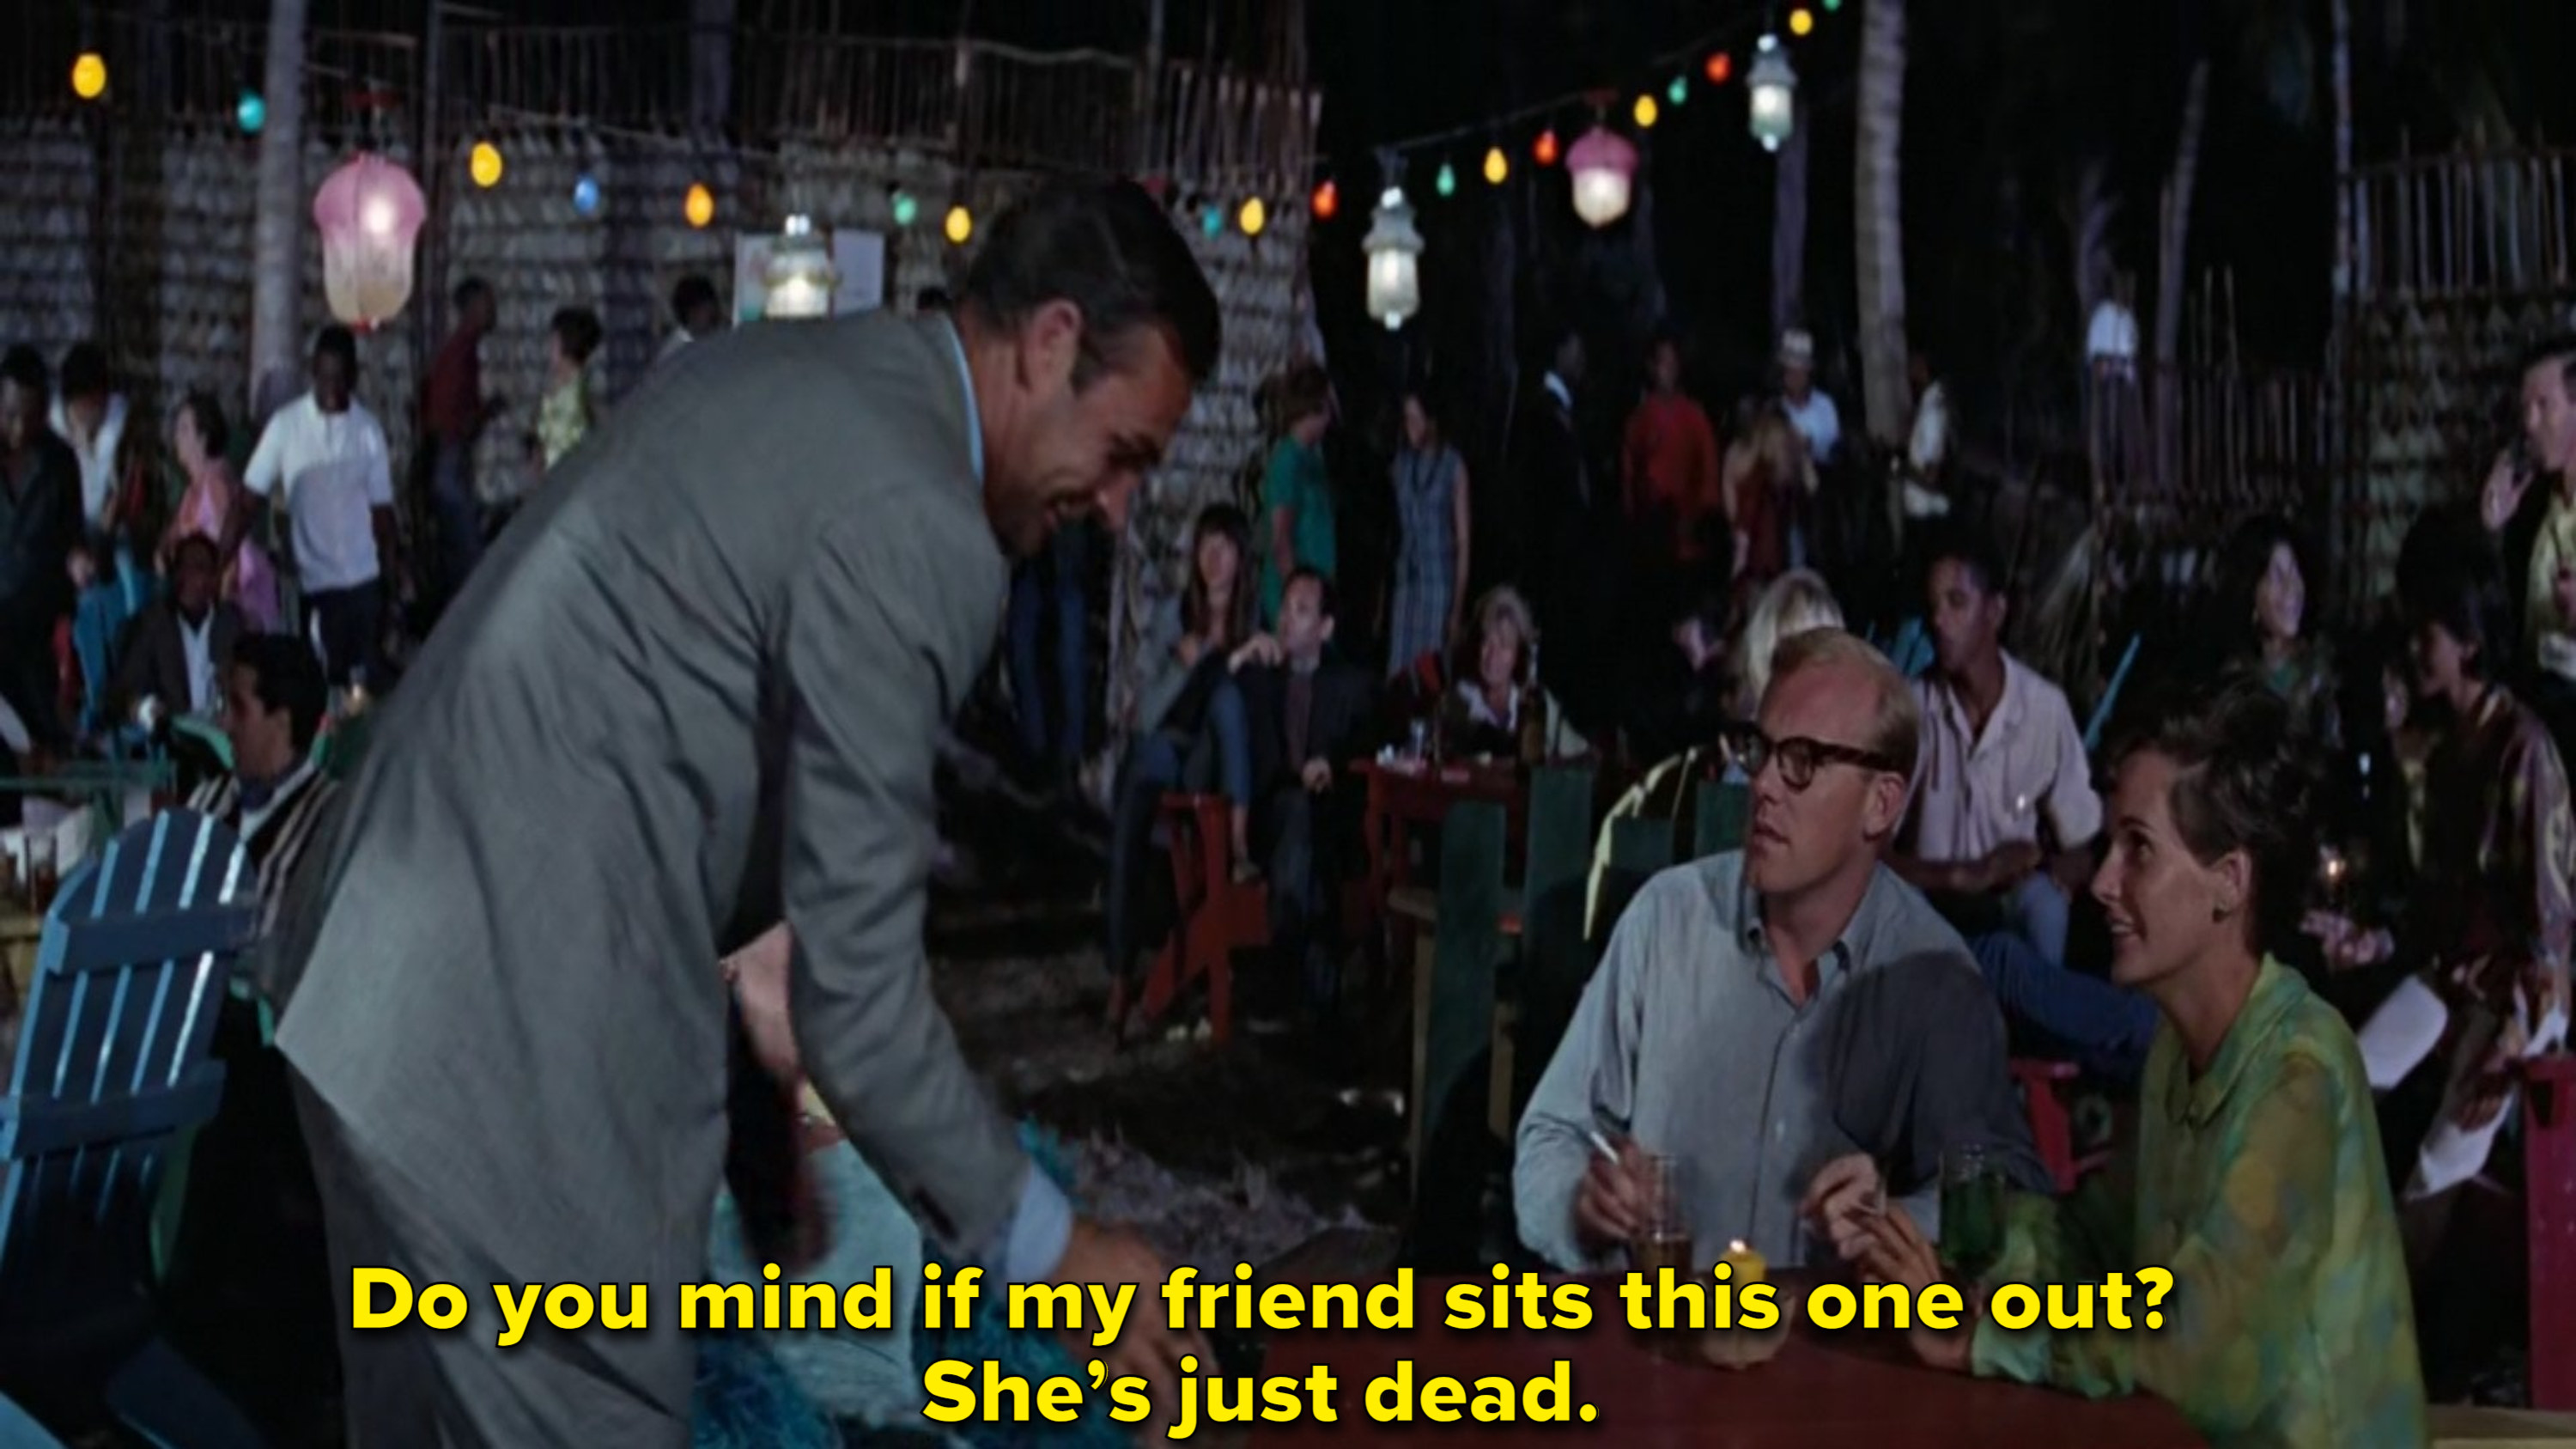 James Bond helps sit the corpse of a woman at a table while shocked guests look on